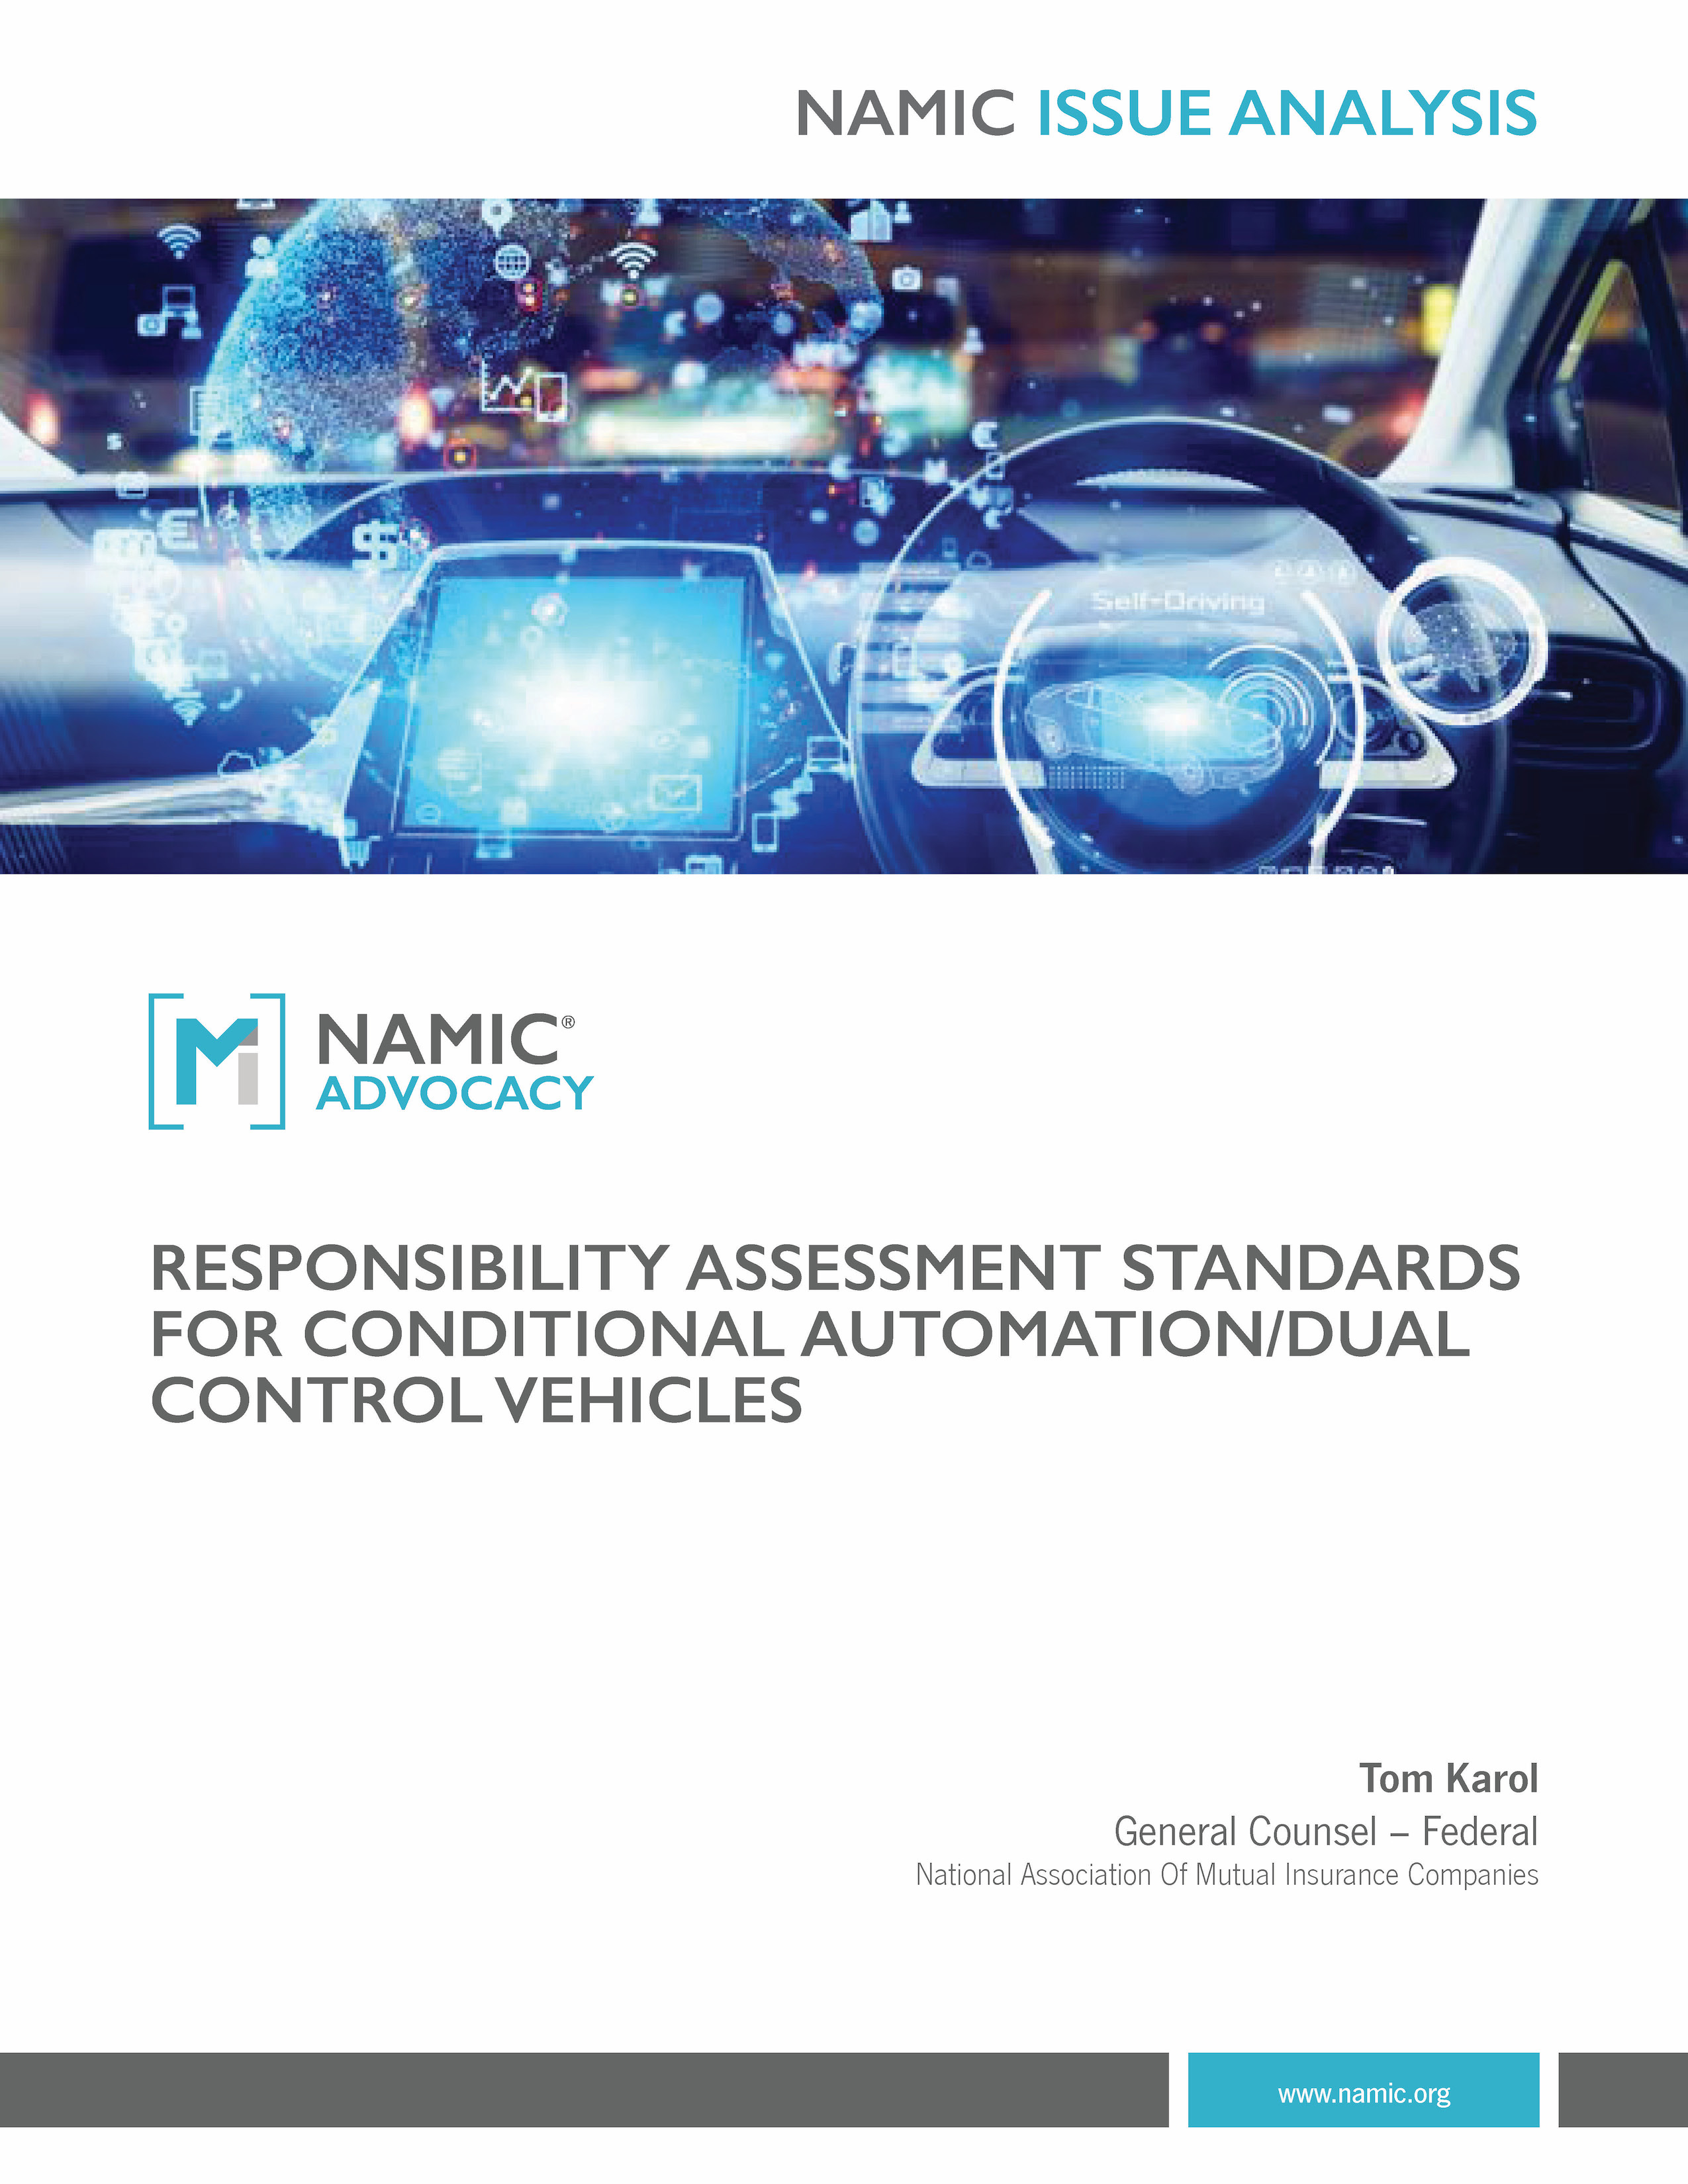 Responsibility Assessment Standards for Conditional Automation/Dual Control Vehicles PDF